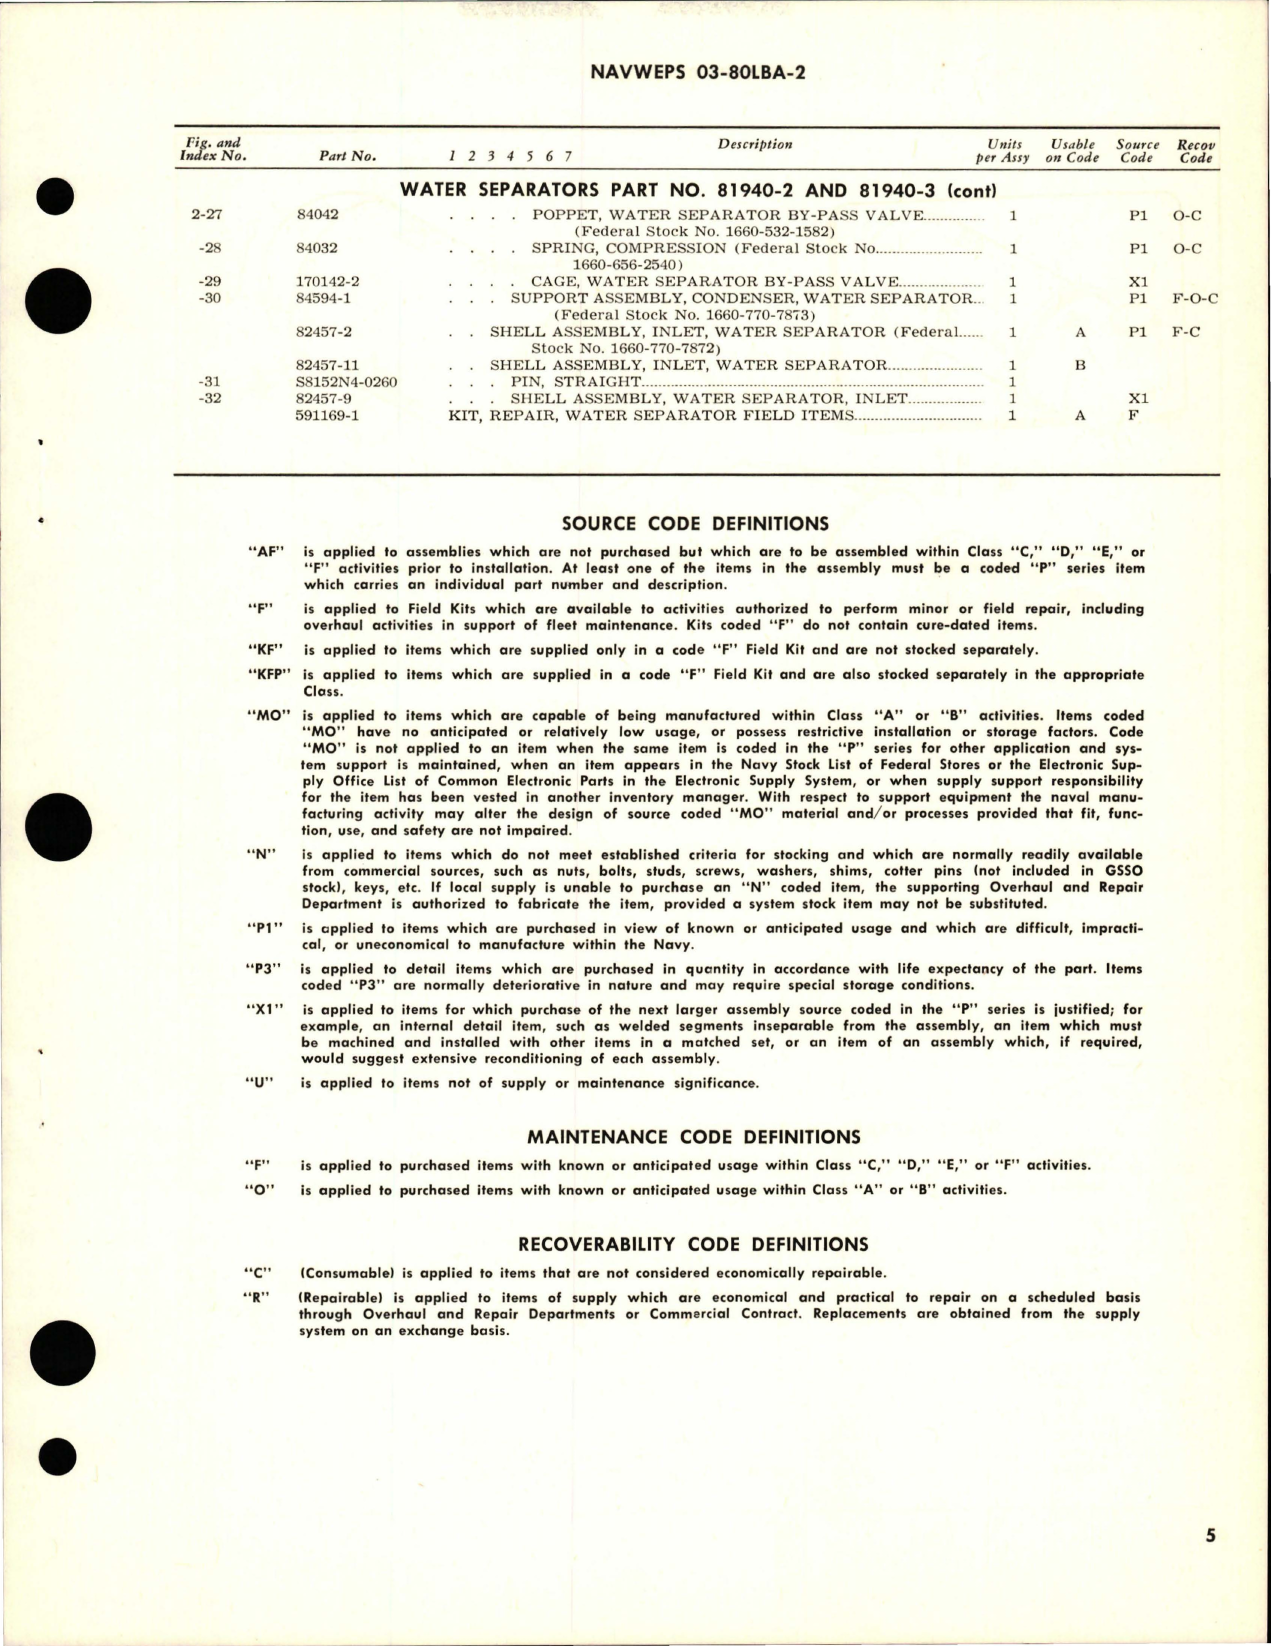 Sample page 5 from AirCorps Library document: Overhaul Instructions with Parts Breakdown for Water Separators - Parts 81940-2 and 81940-3 